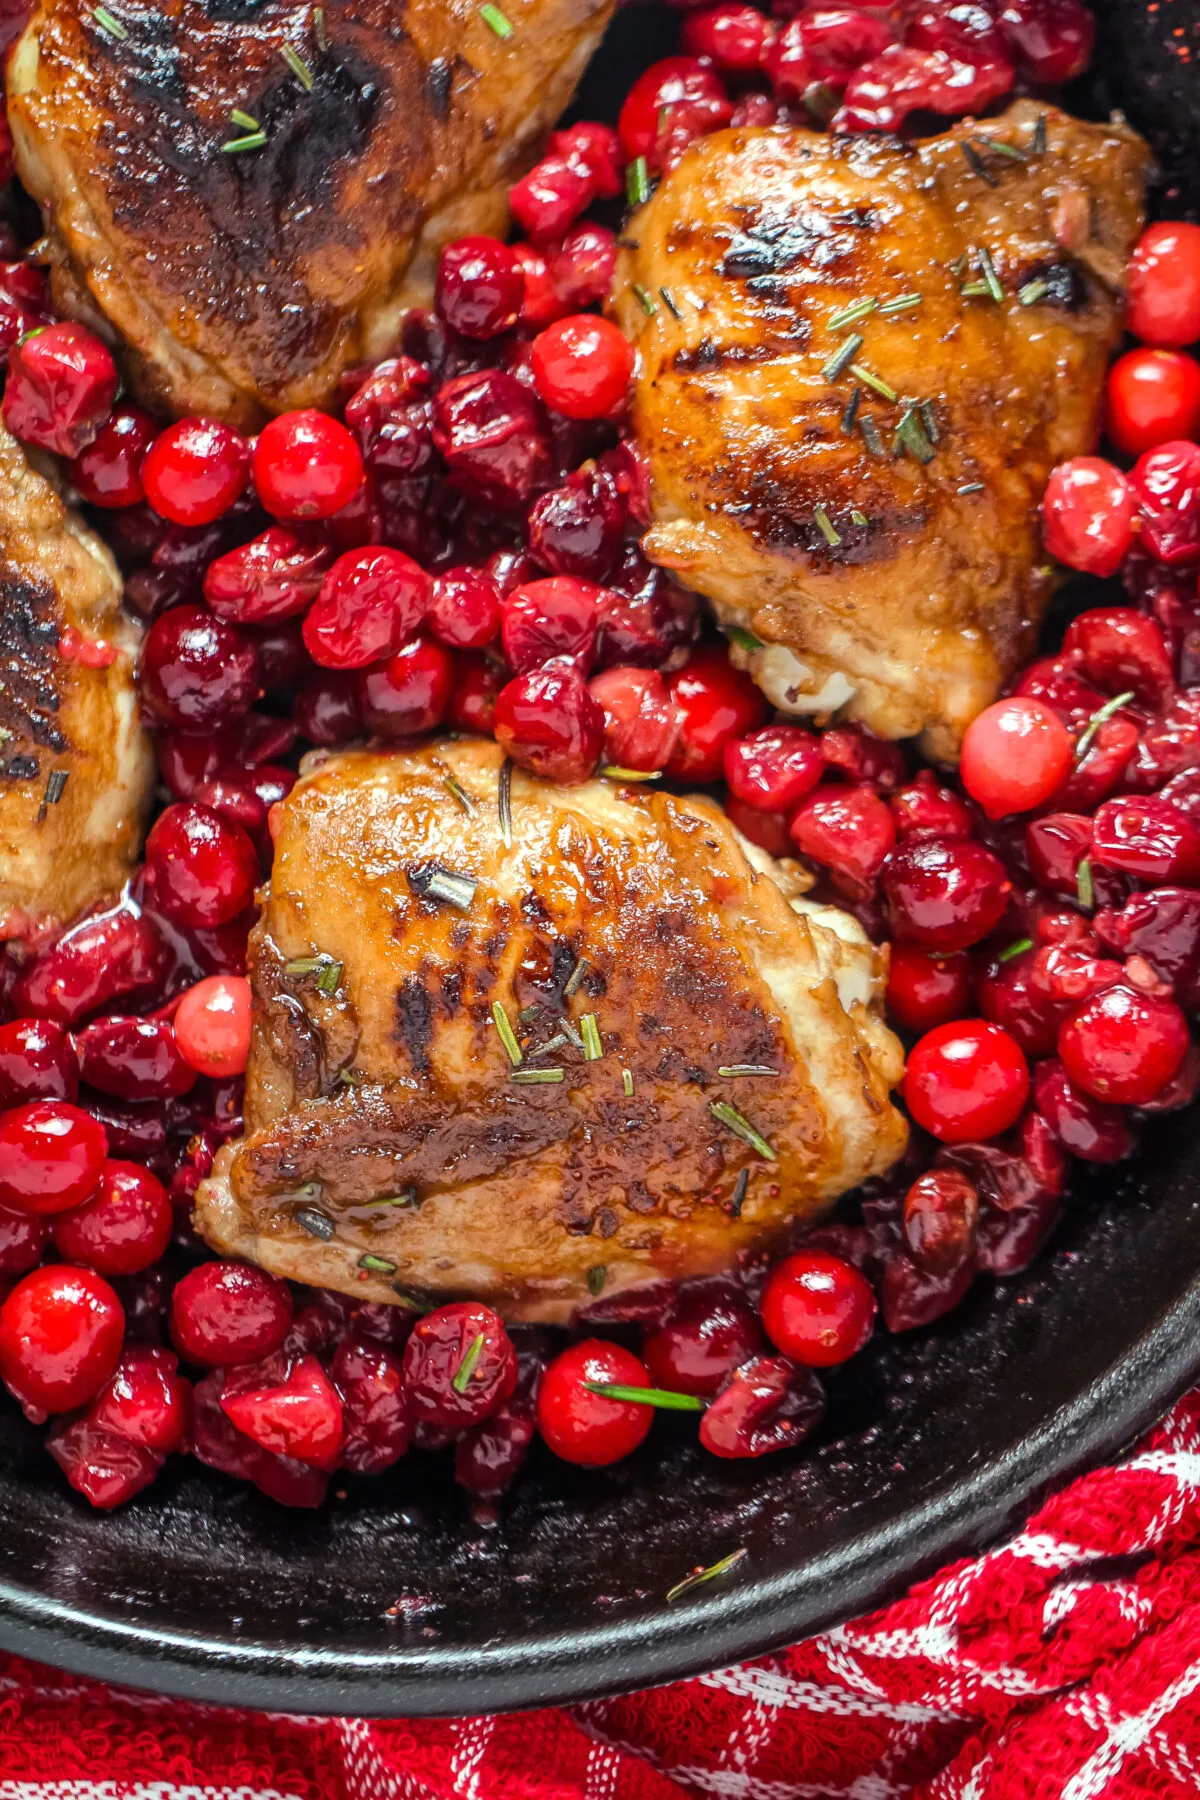 This Cranberry Roasted Chicken recipe is easy to make plus it's a one pan dinner that is oh so deliciously festive and seasonal.